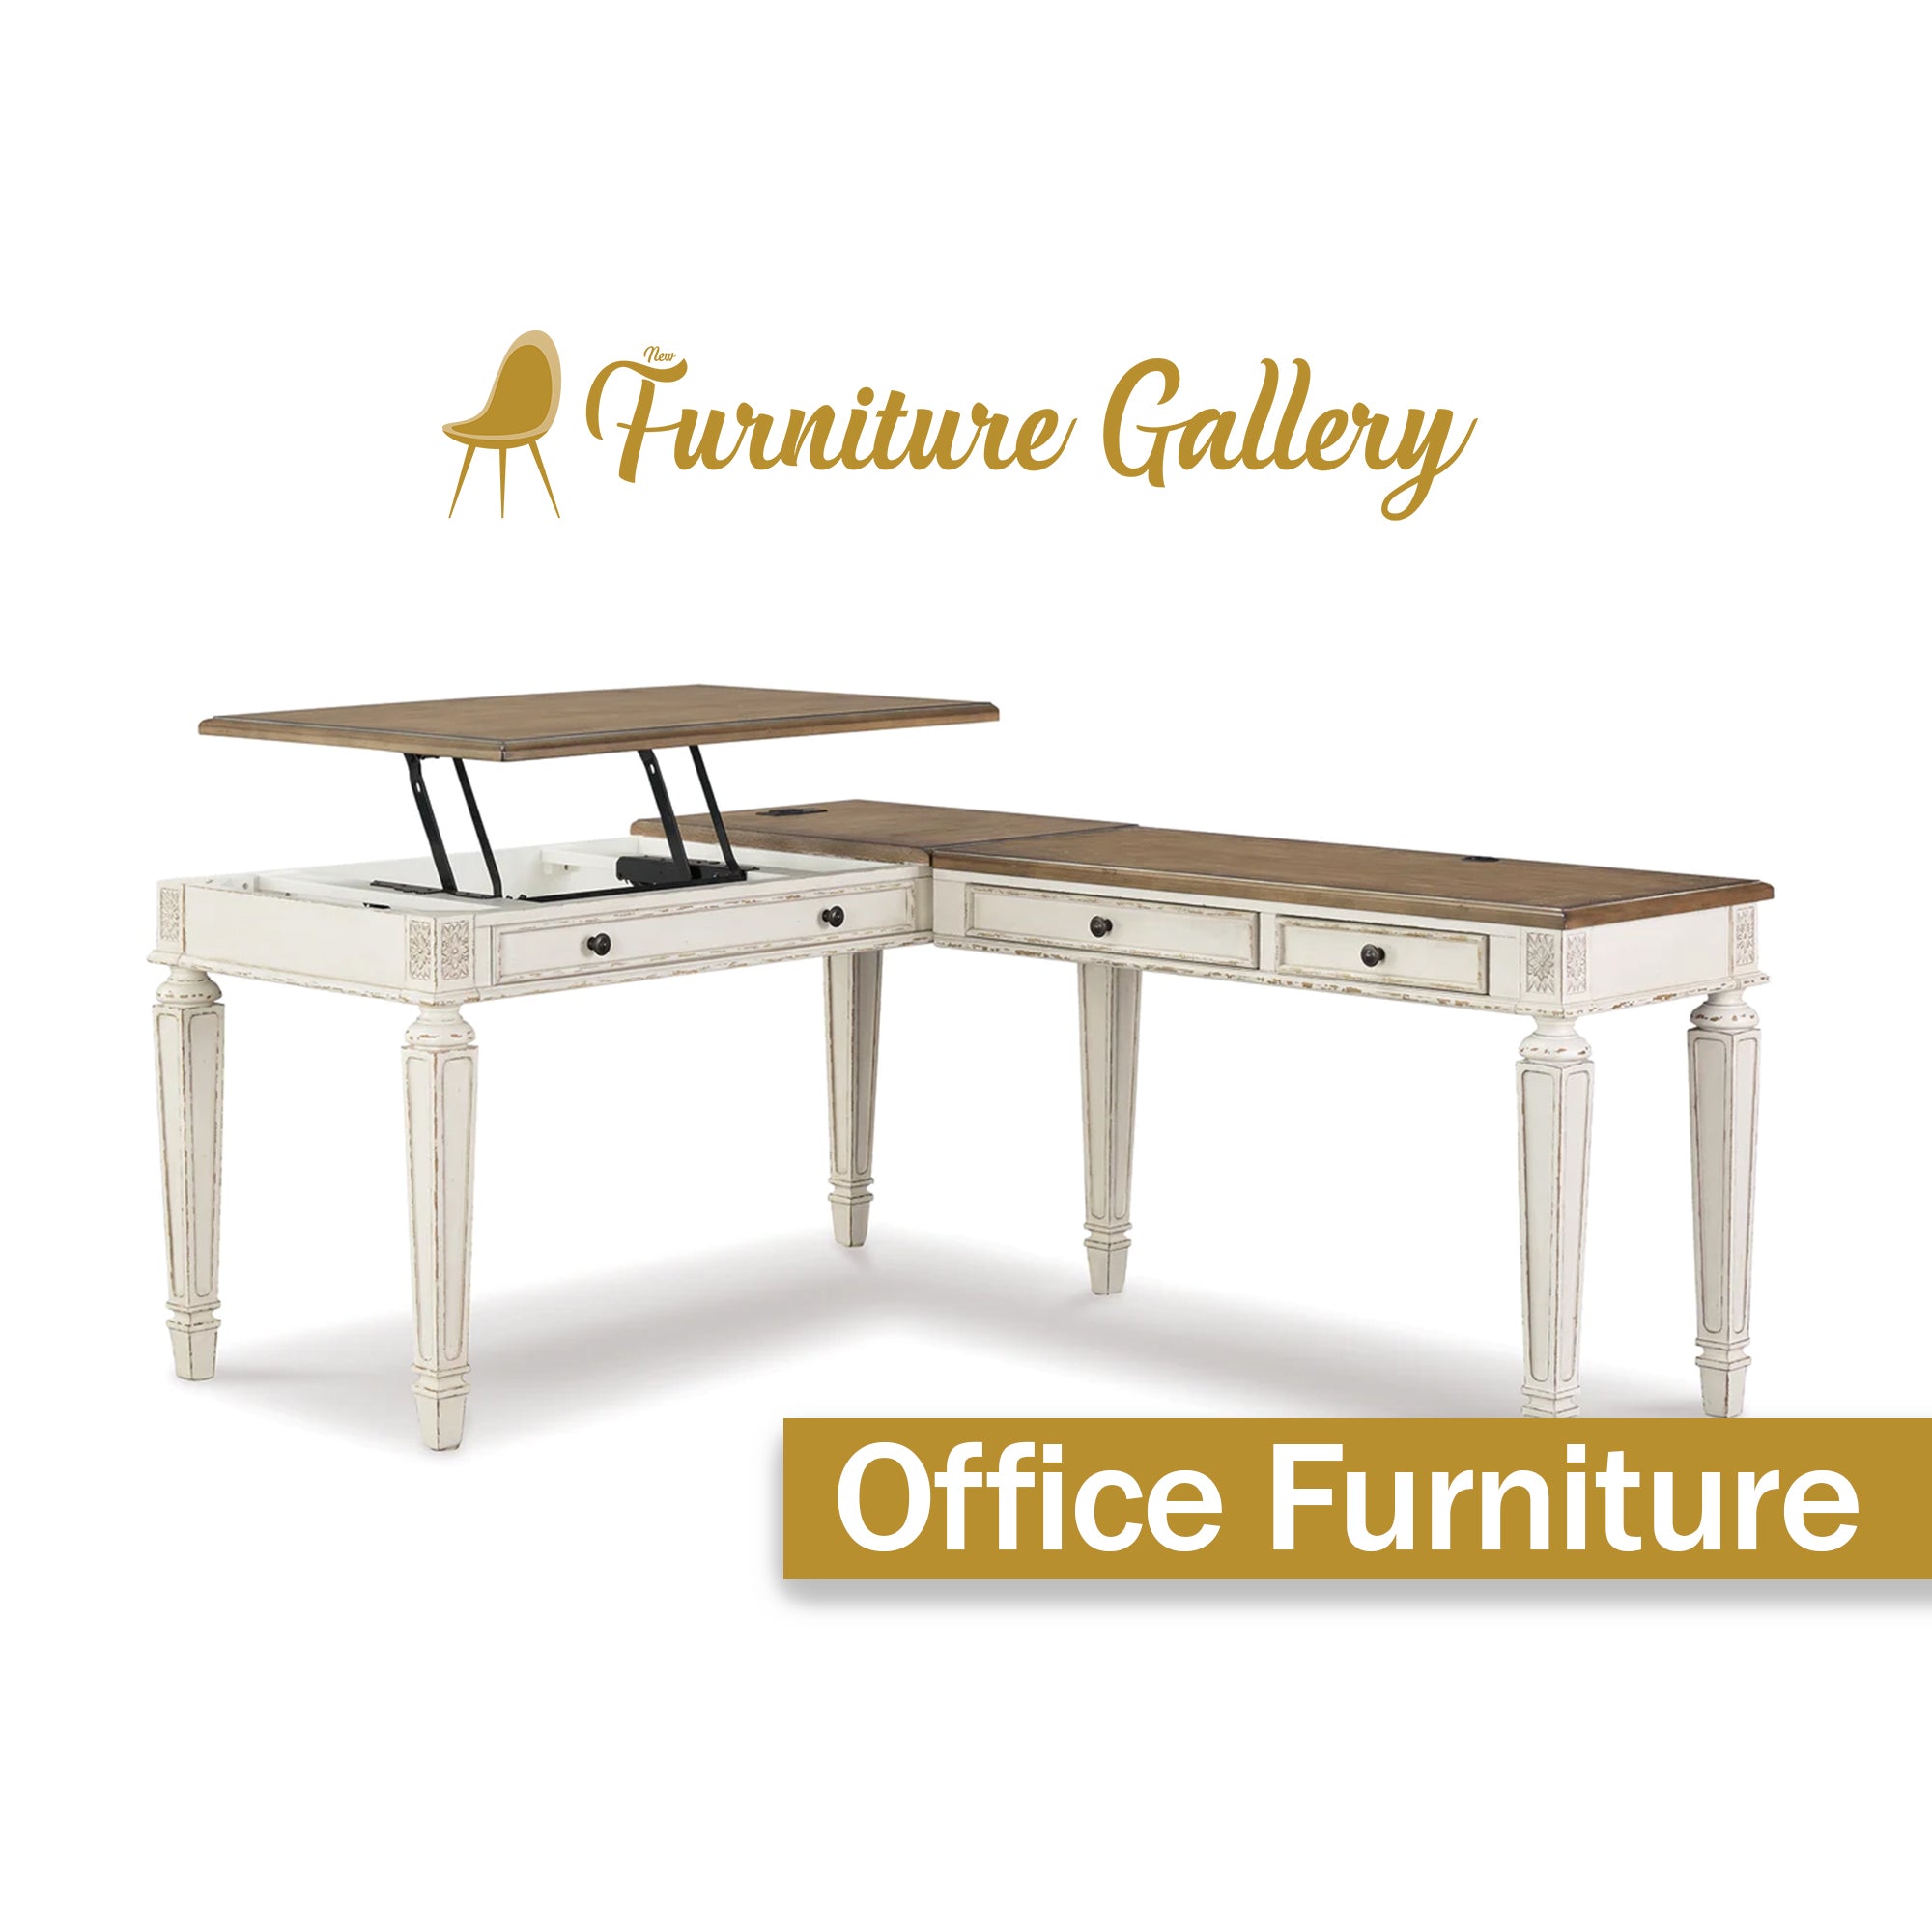 New furniture gallery, A furniture store in Toronto Canada. This Image consists of office furniture from New Furniture Gallery